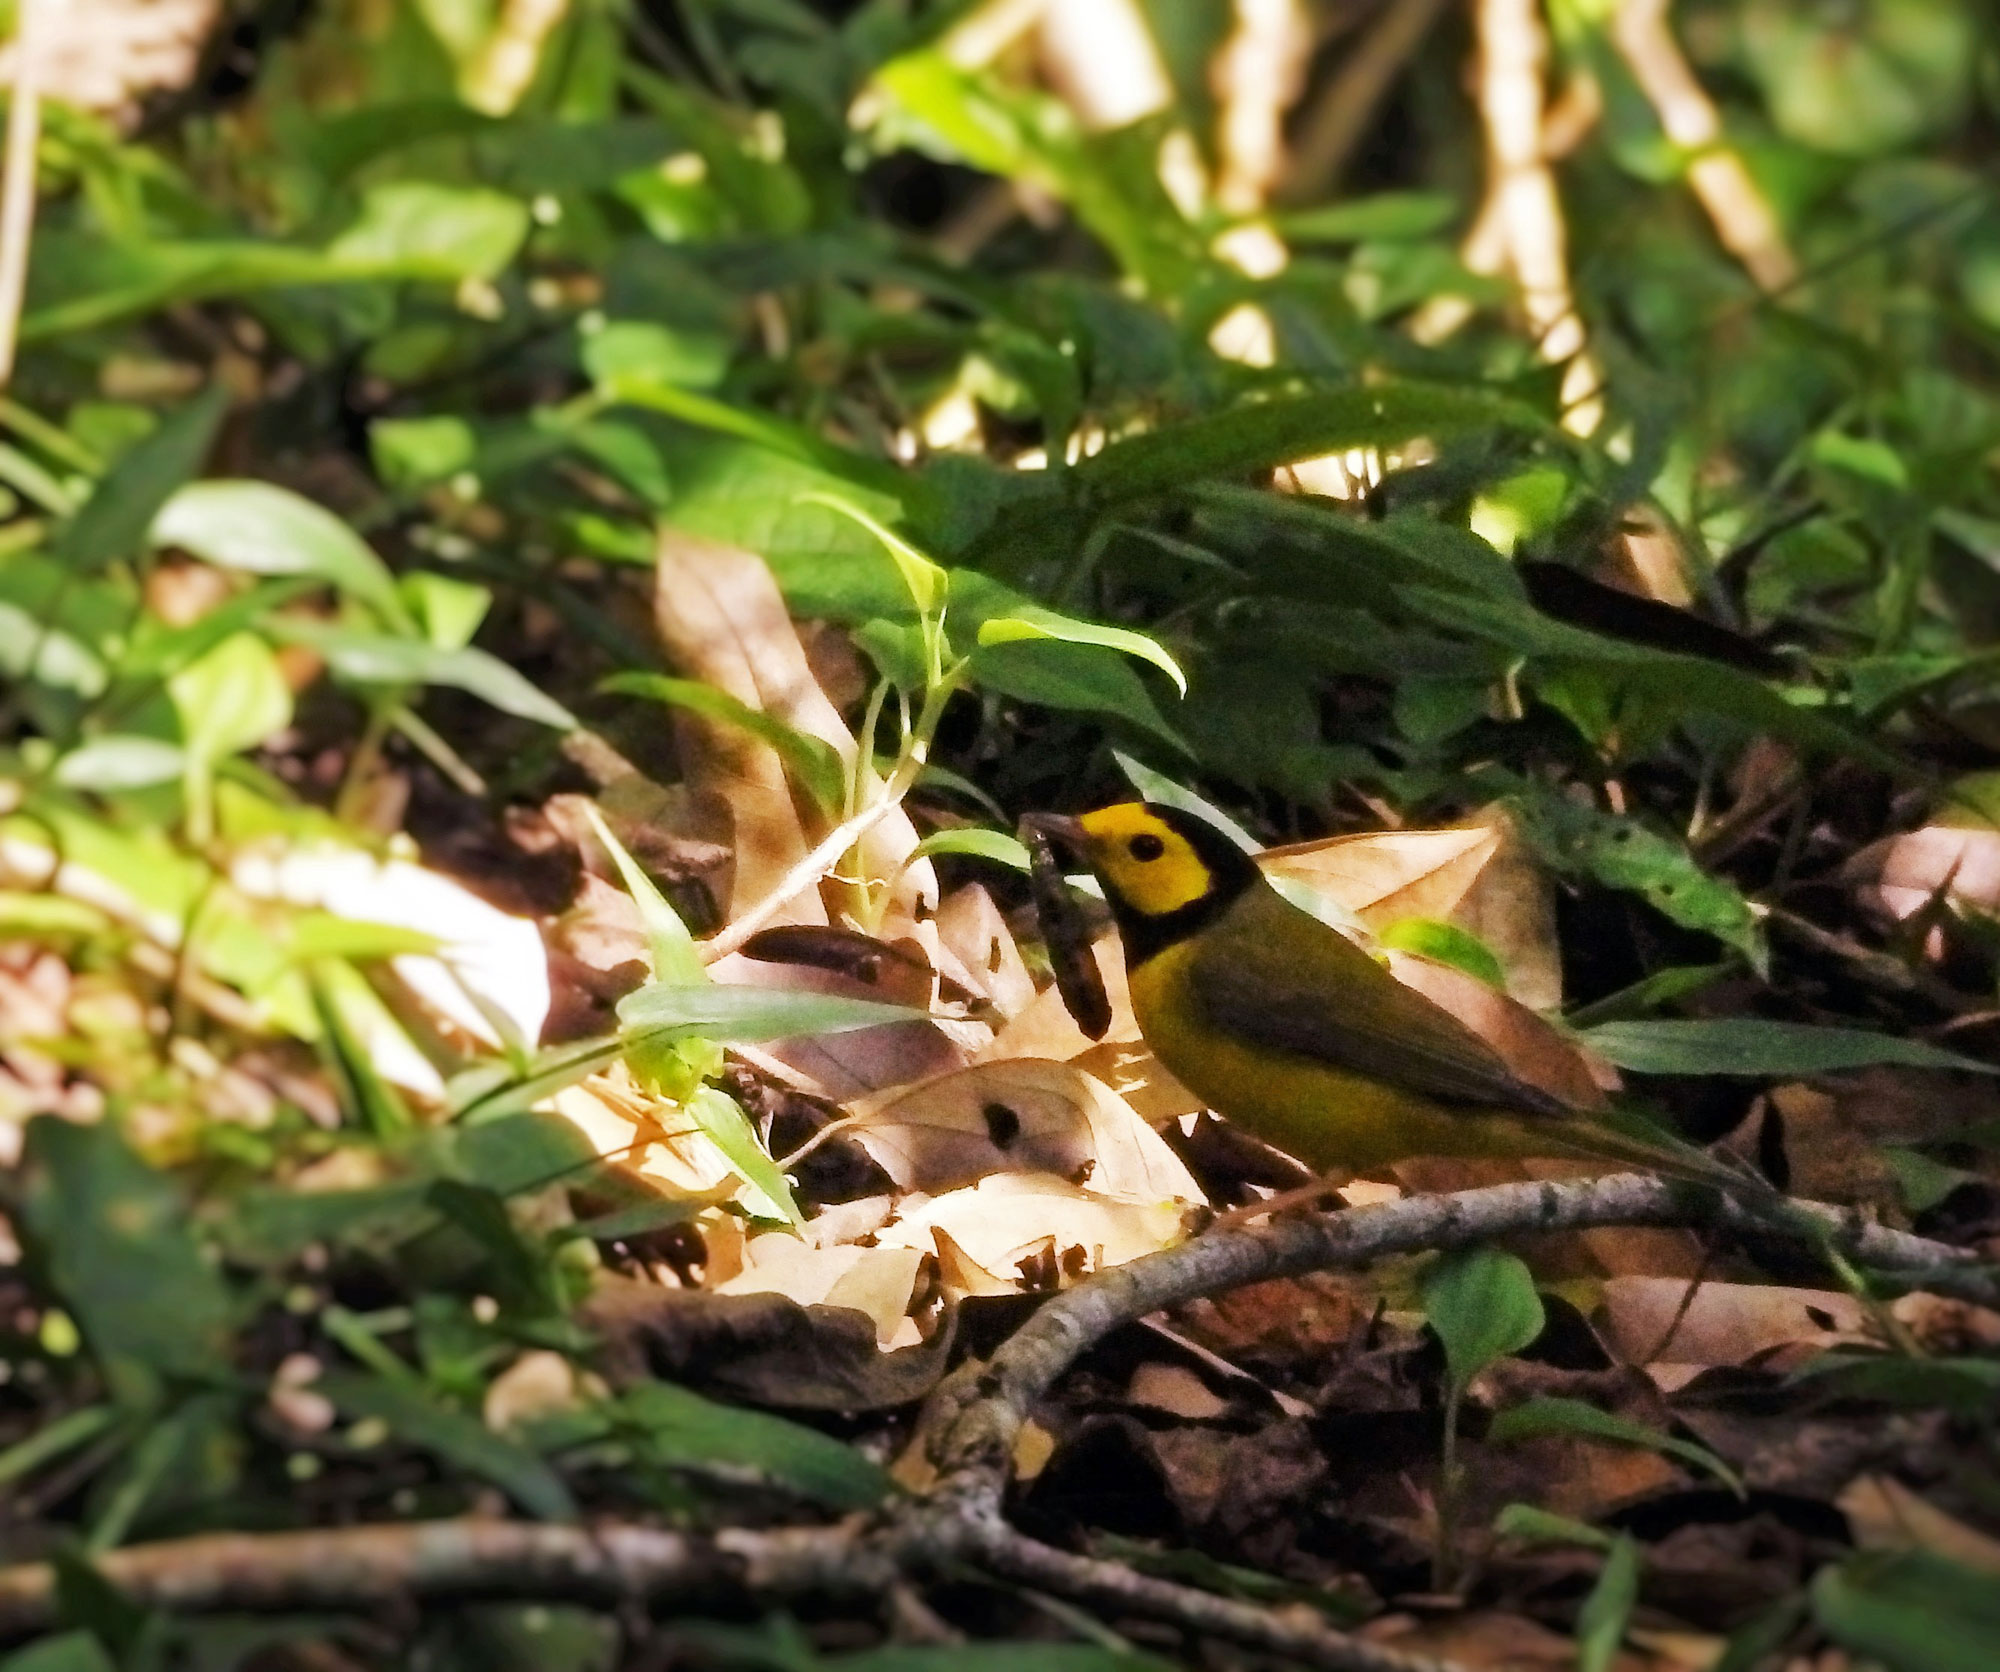 small yellow bird on forest floor with grub in its beak